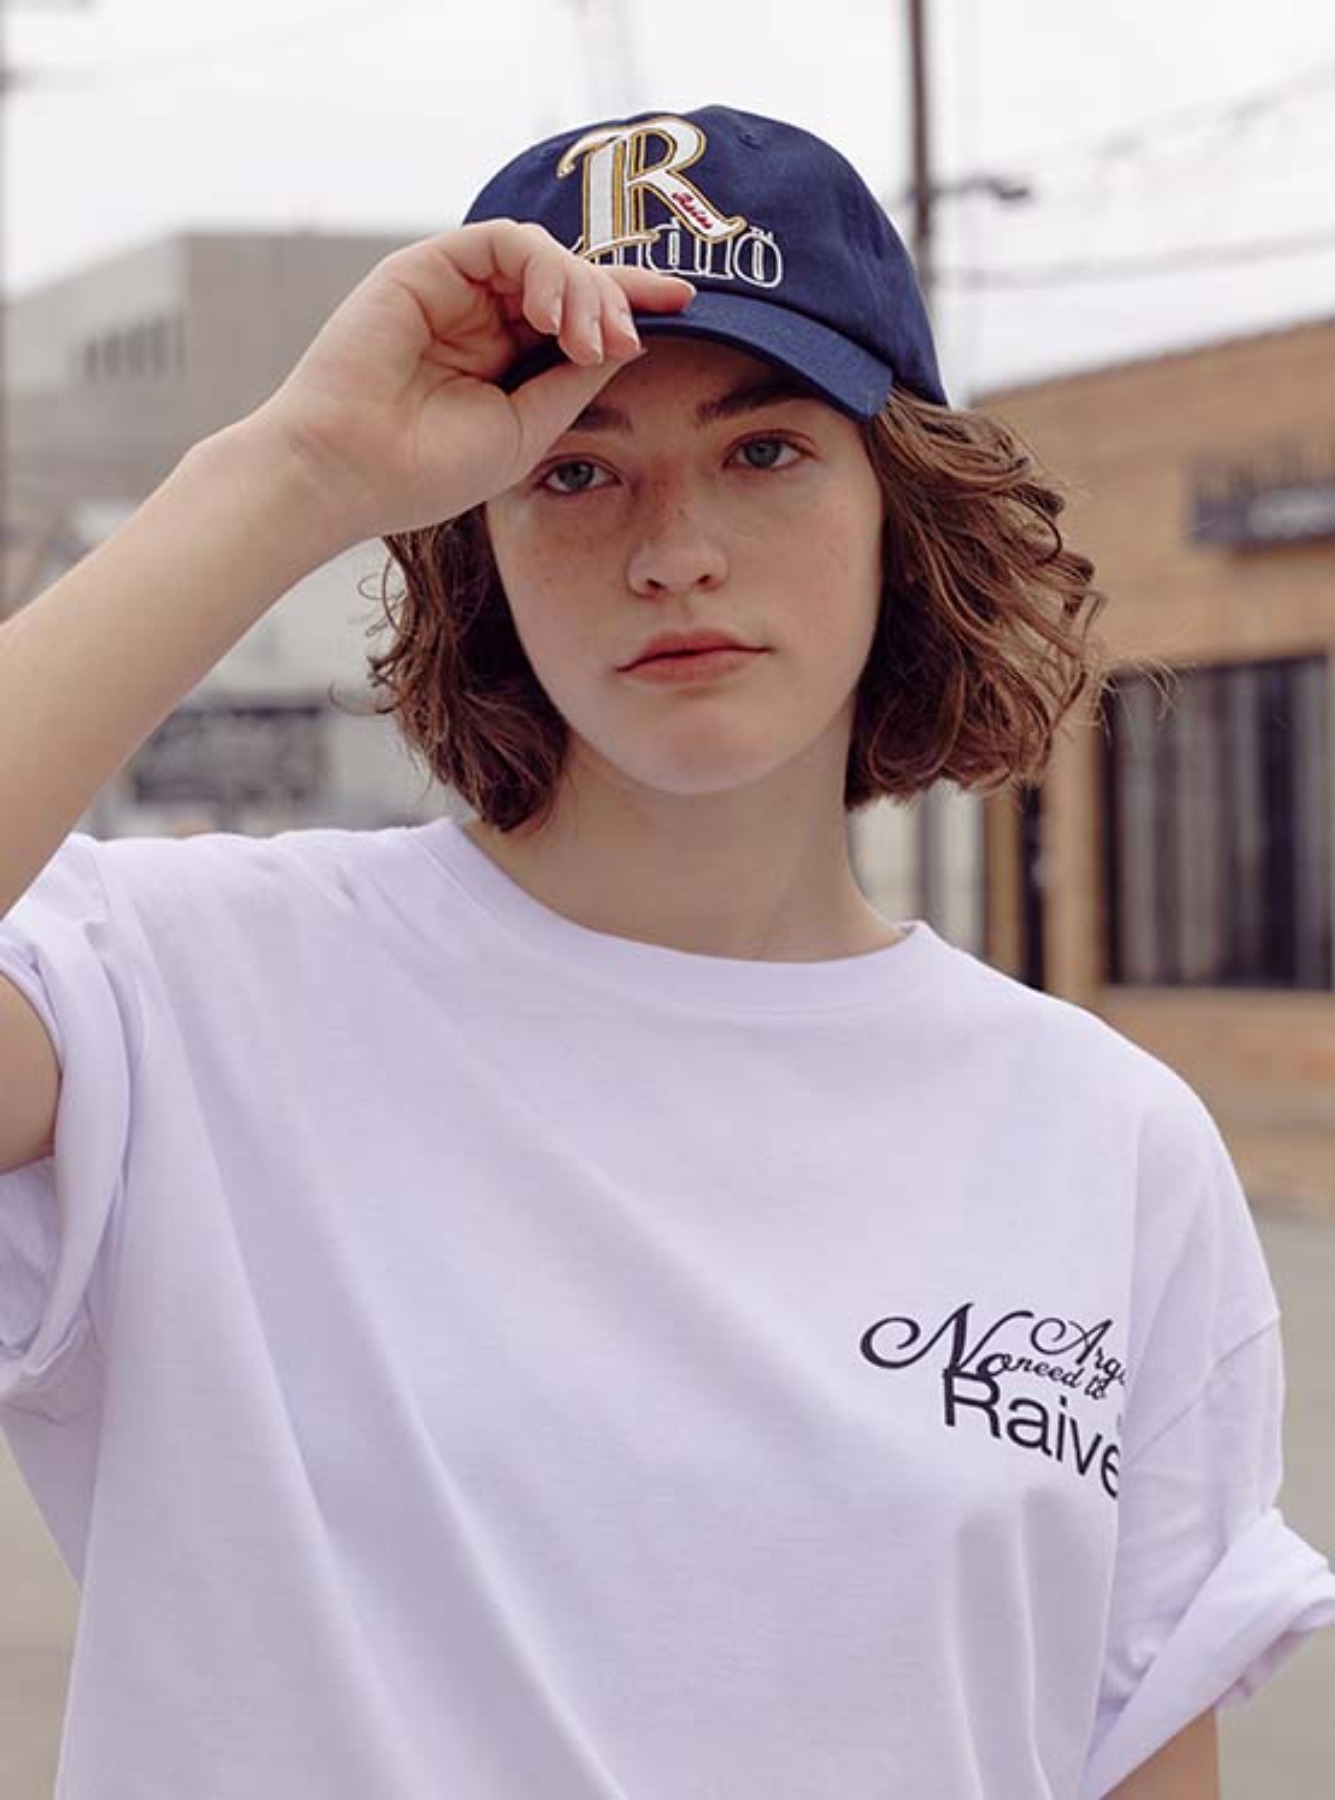 RAIVE Solid Cap in Navy VX3MA302-23